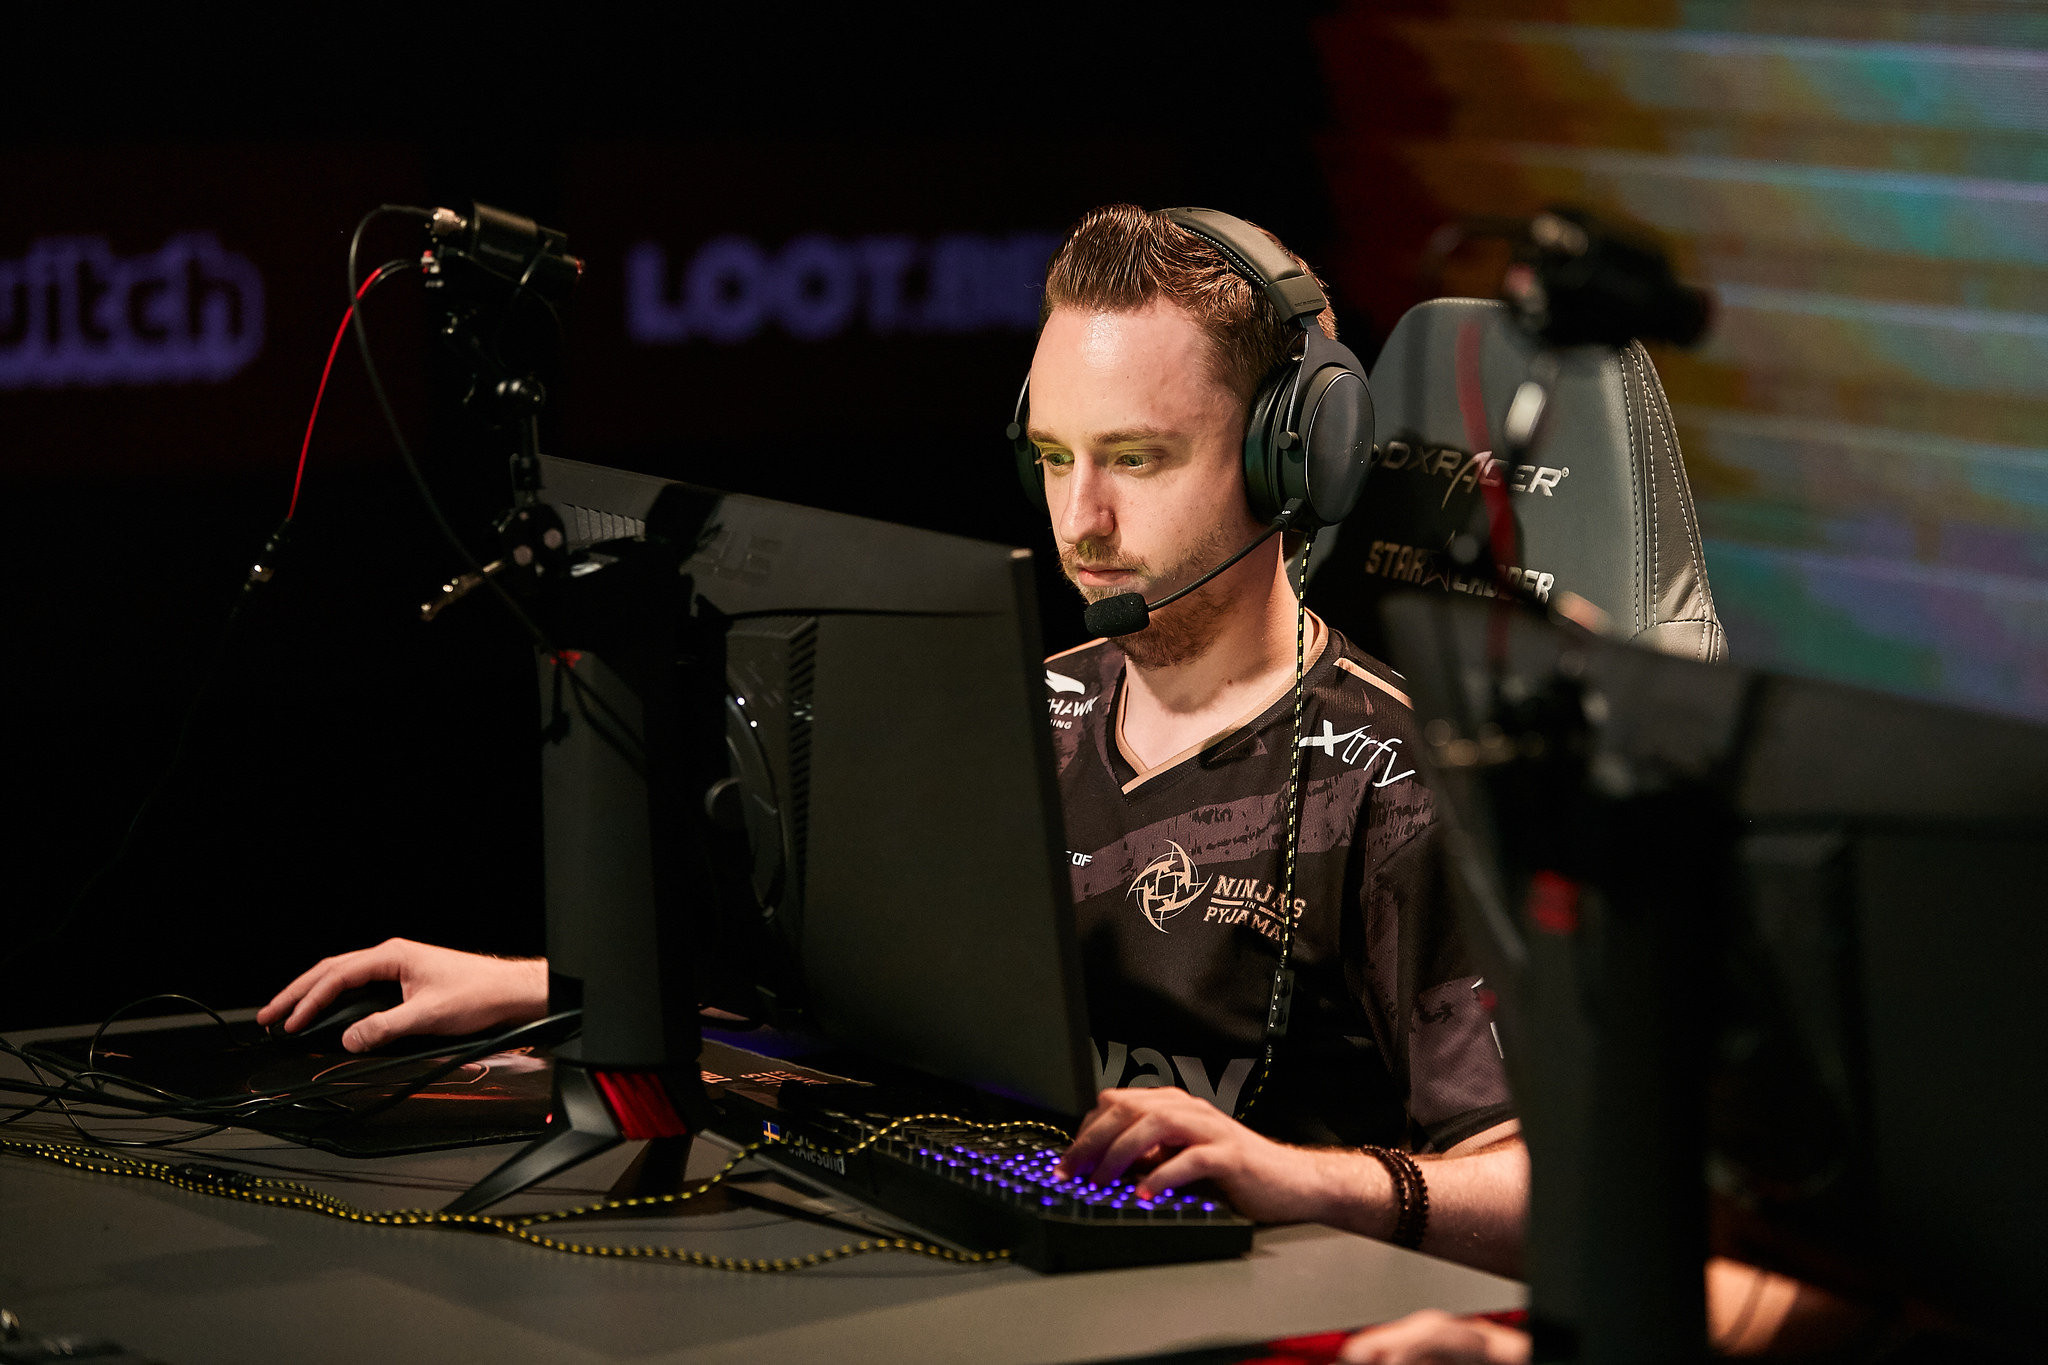 GeT_RiGhT accrued 23 LAN wins and 10 MVP awards during his time with NiP. 